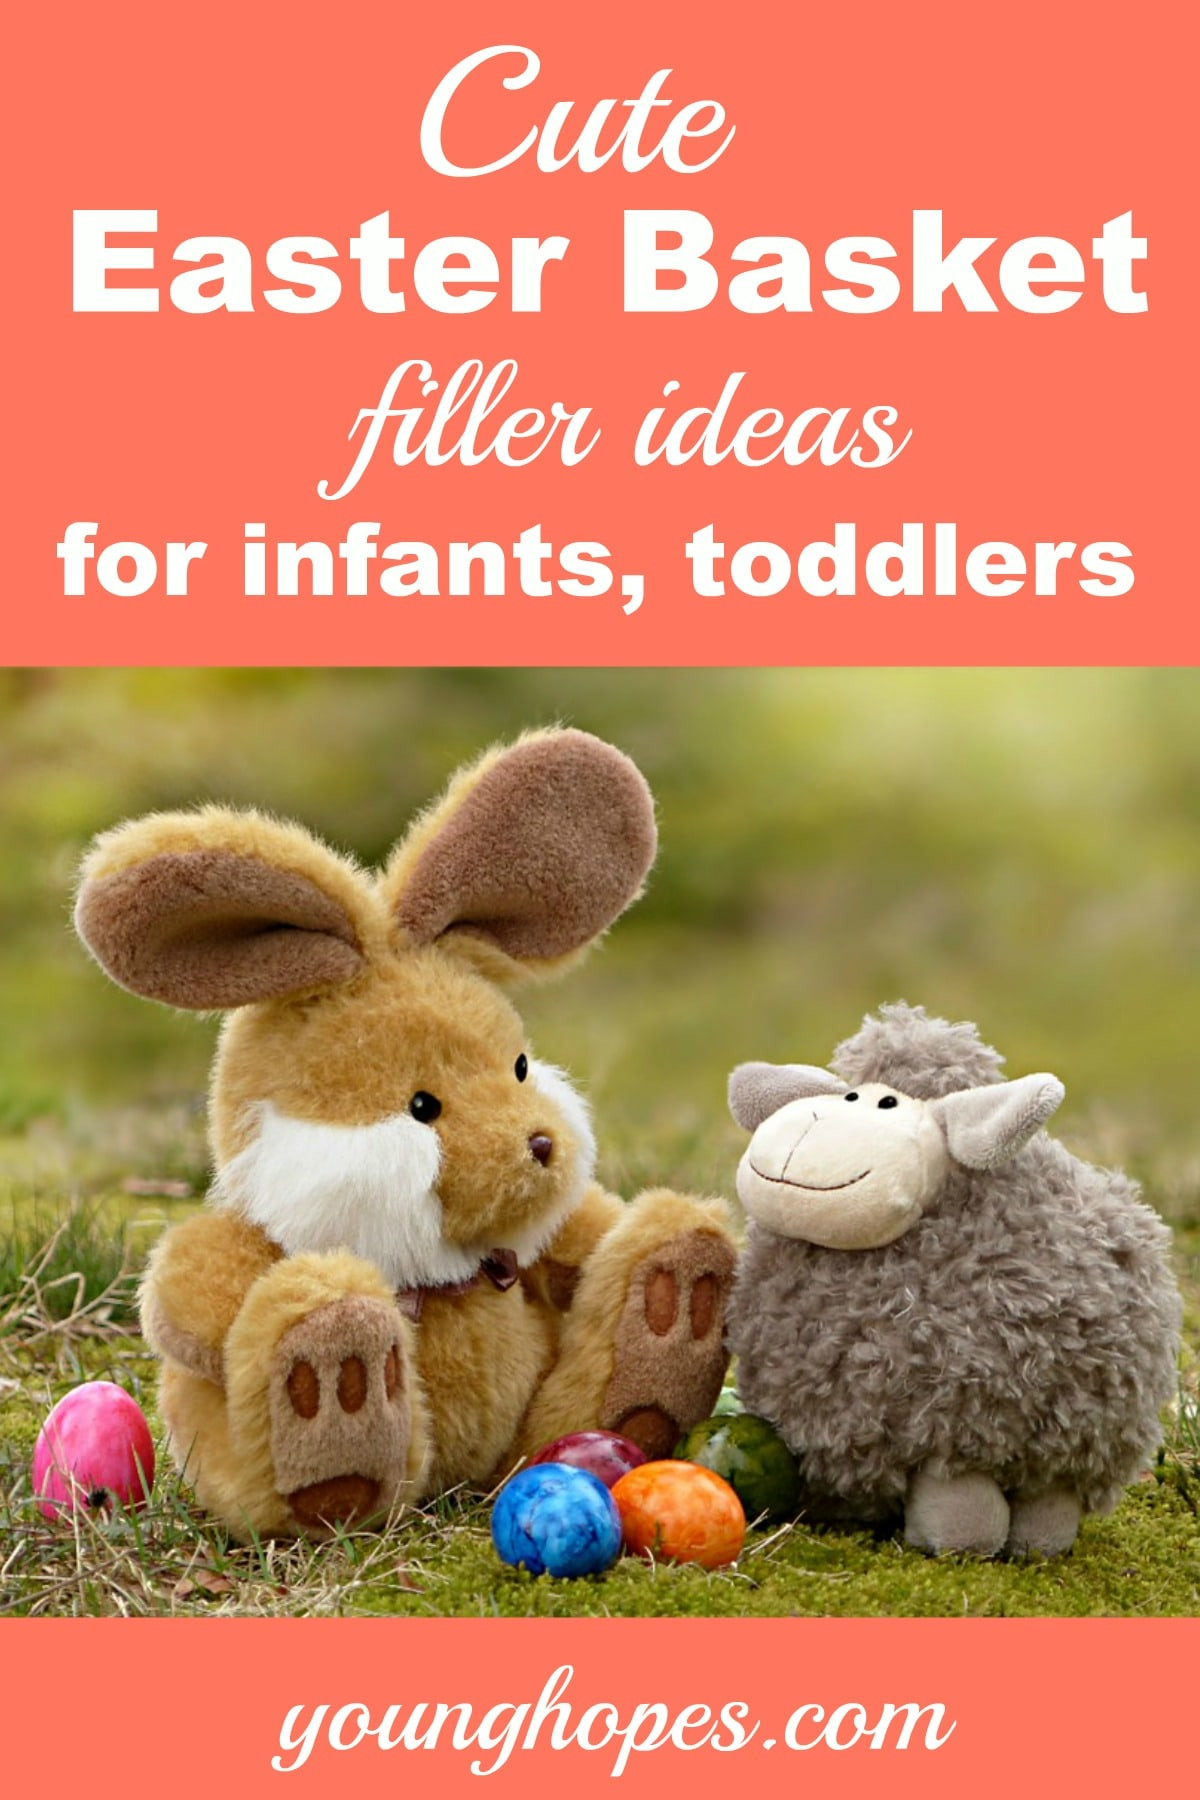 Cute Easter Ideas For Toddlers
 Cute Easter Basket Filler Ideas for Infants and Toddlers